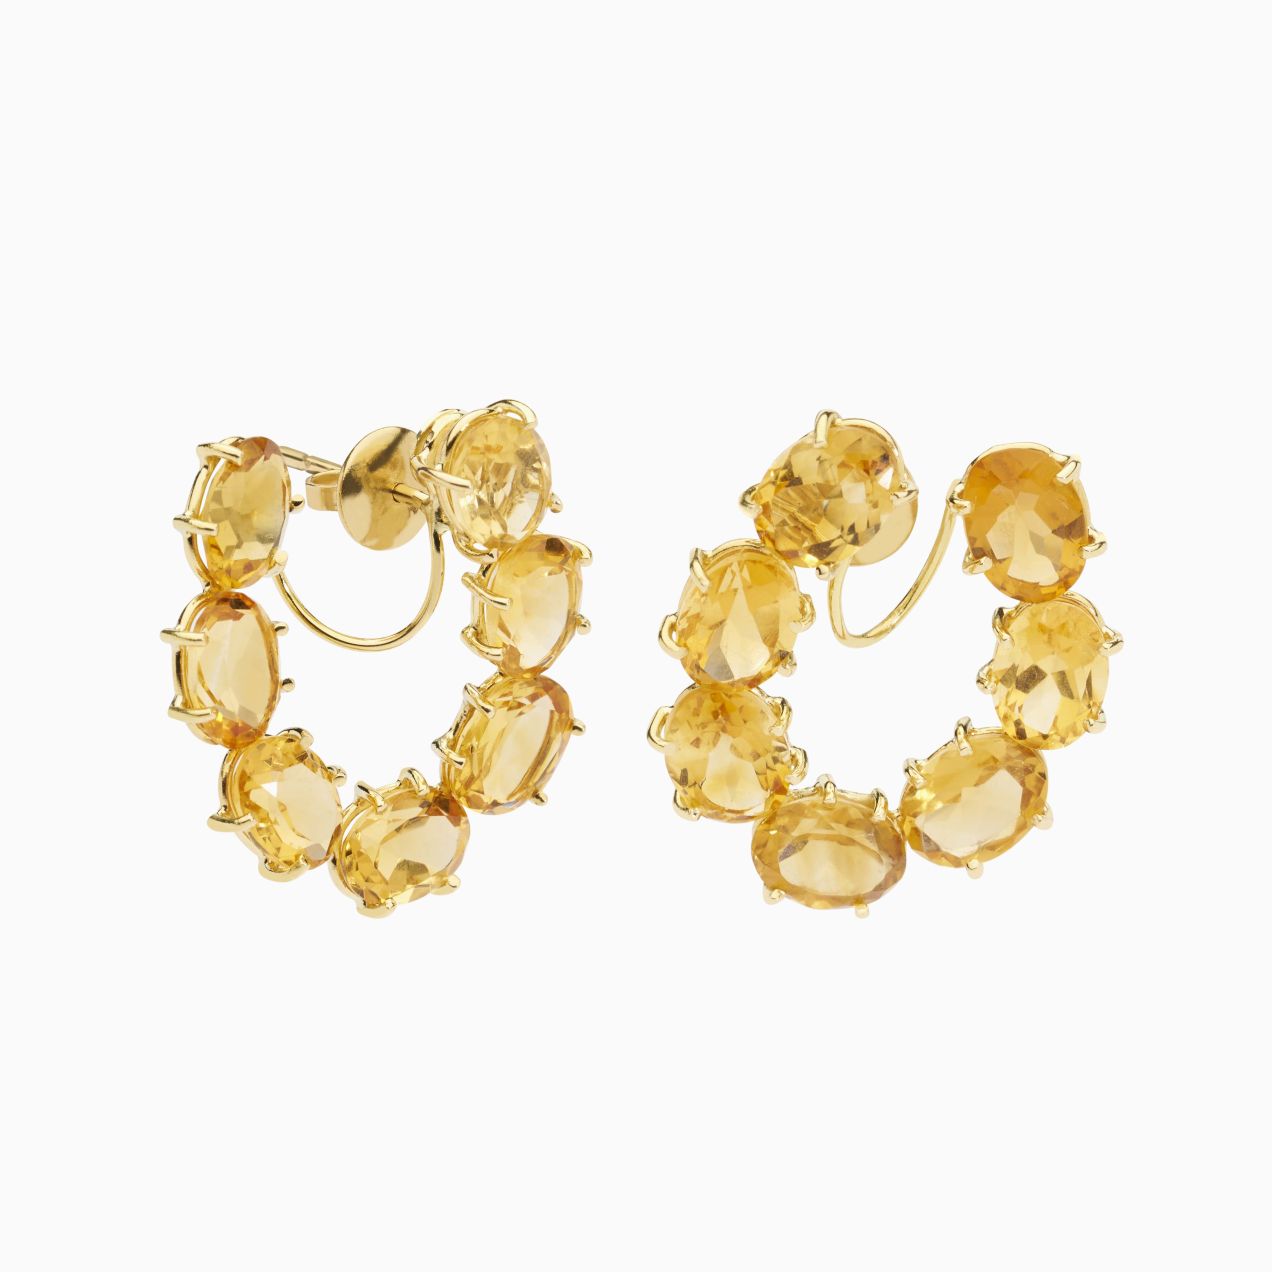 Yellow gold ring earrings with oval citrine gems